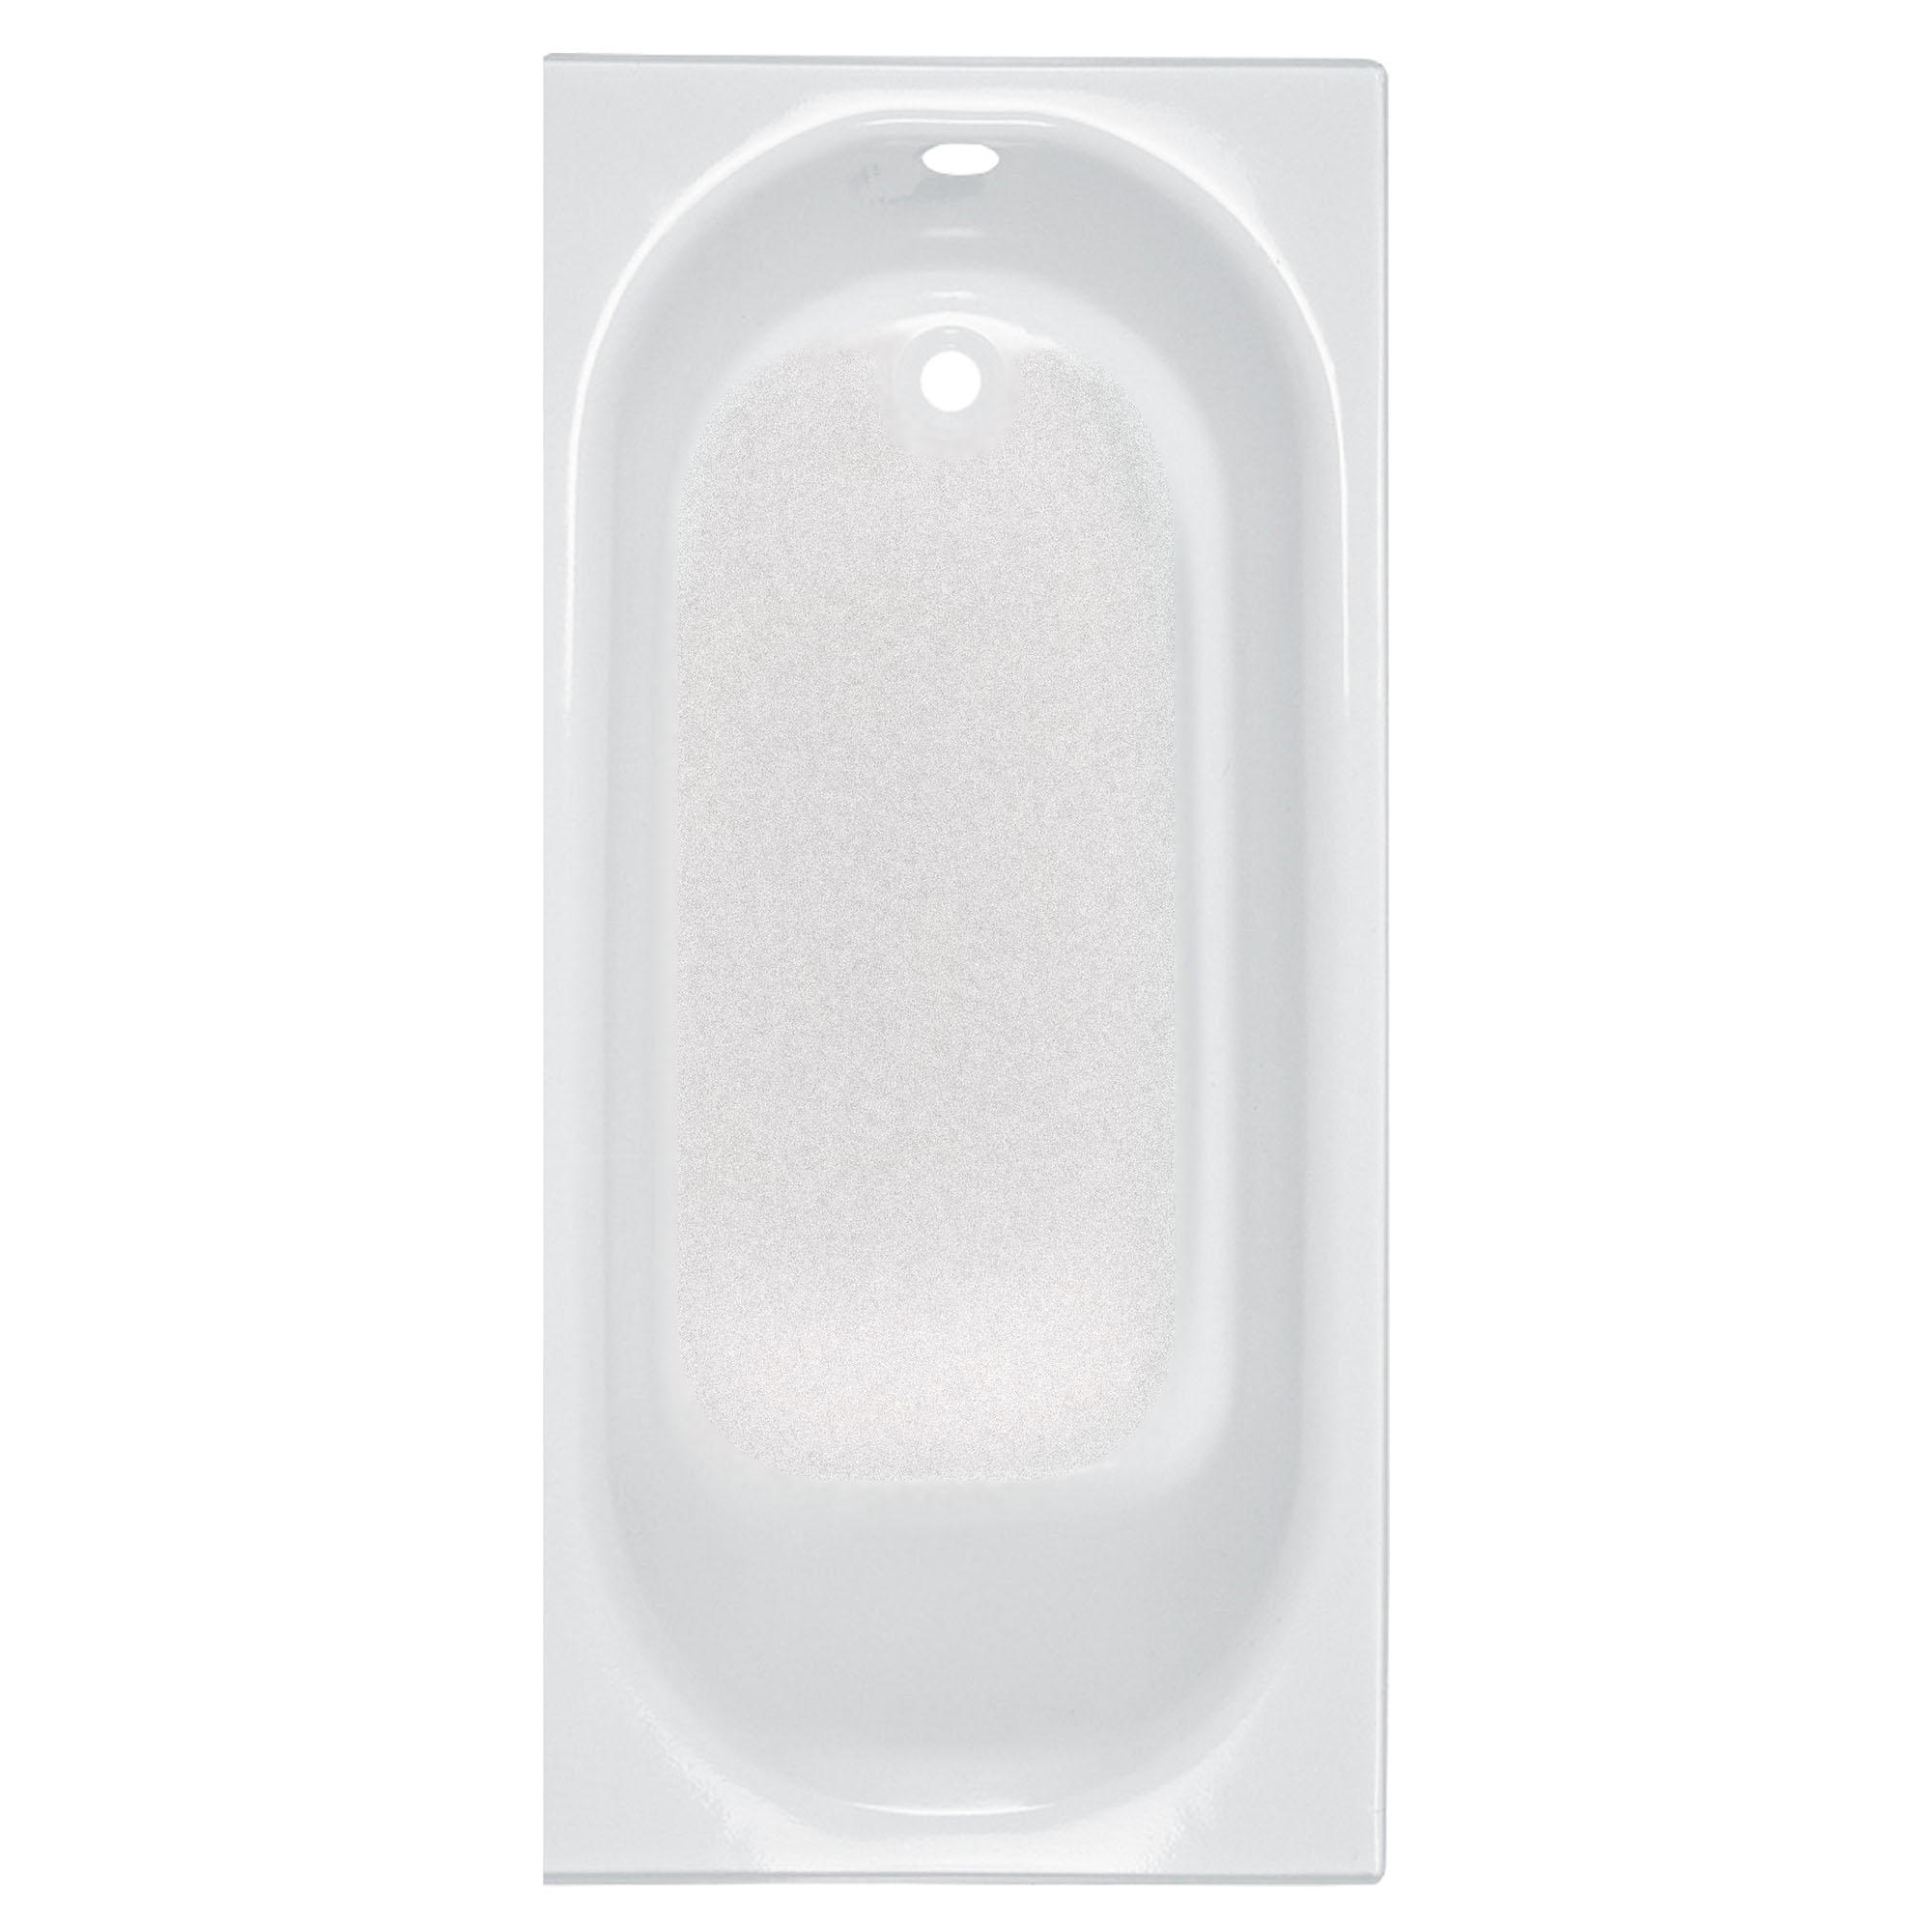 Princeton® Americast® 60 x 30-Inch Integral Apron Bathtub With Right-Hand Outlet